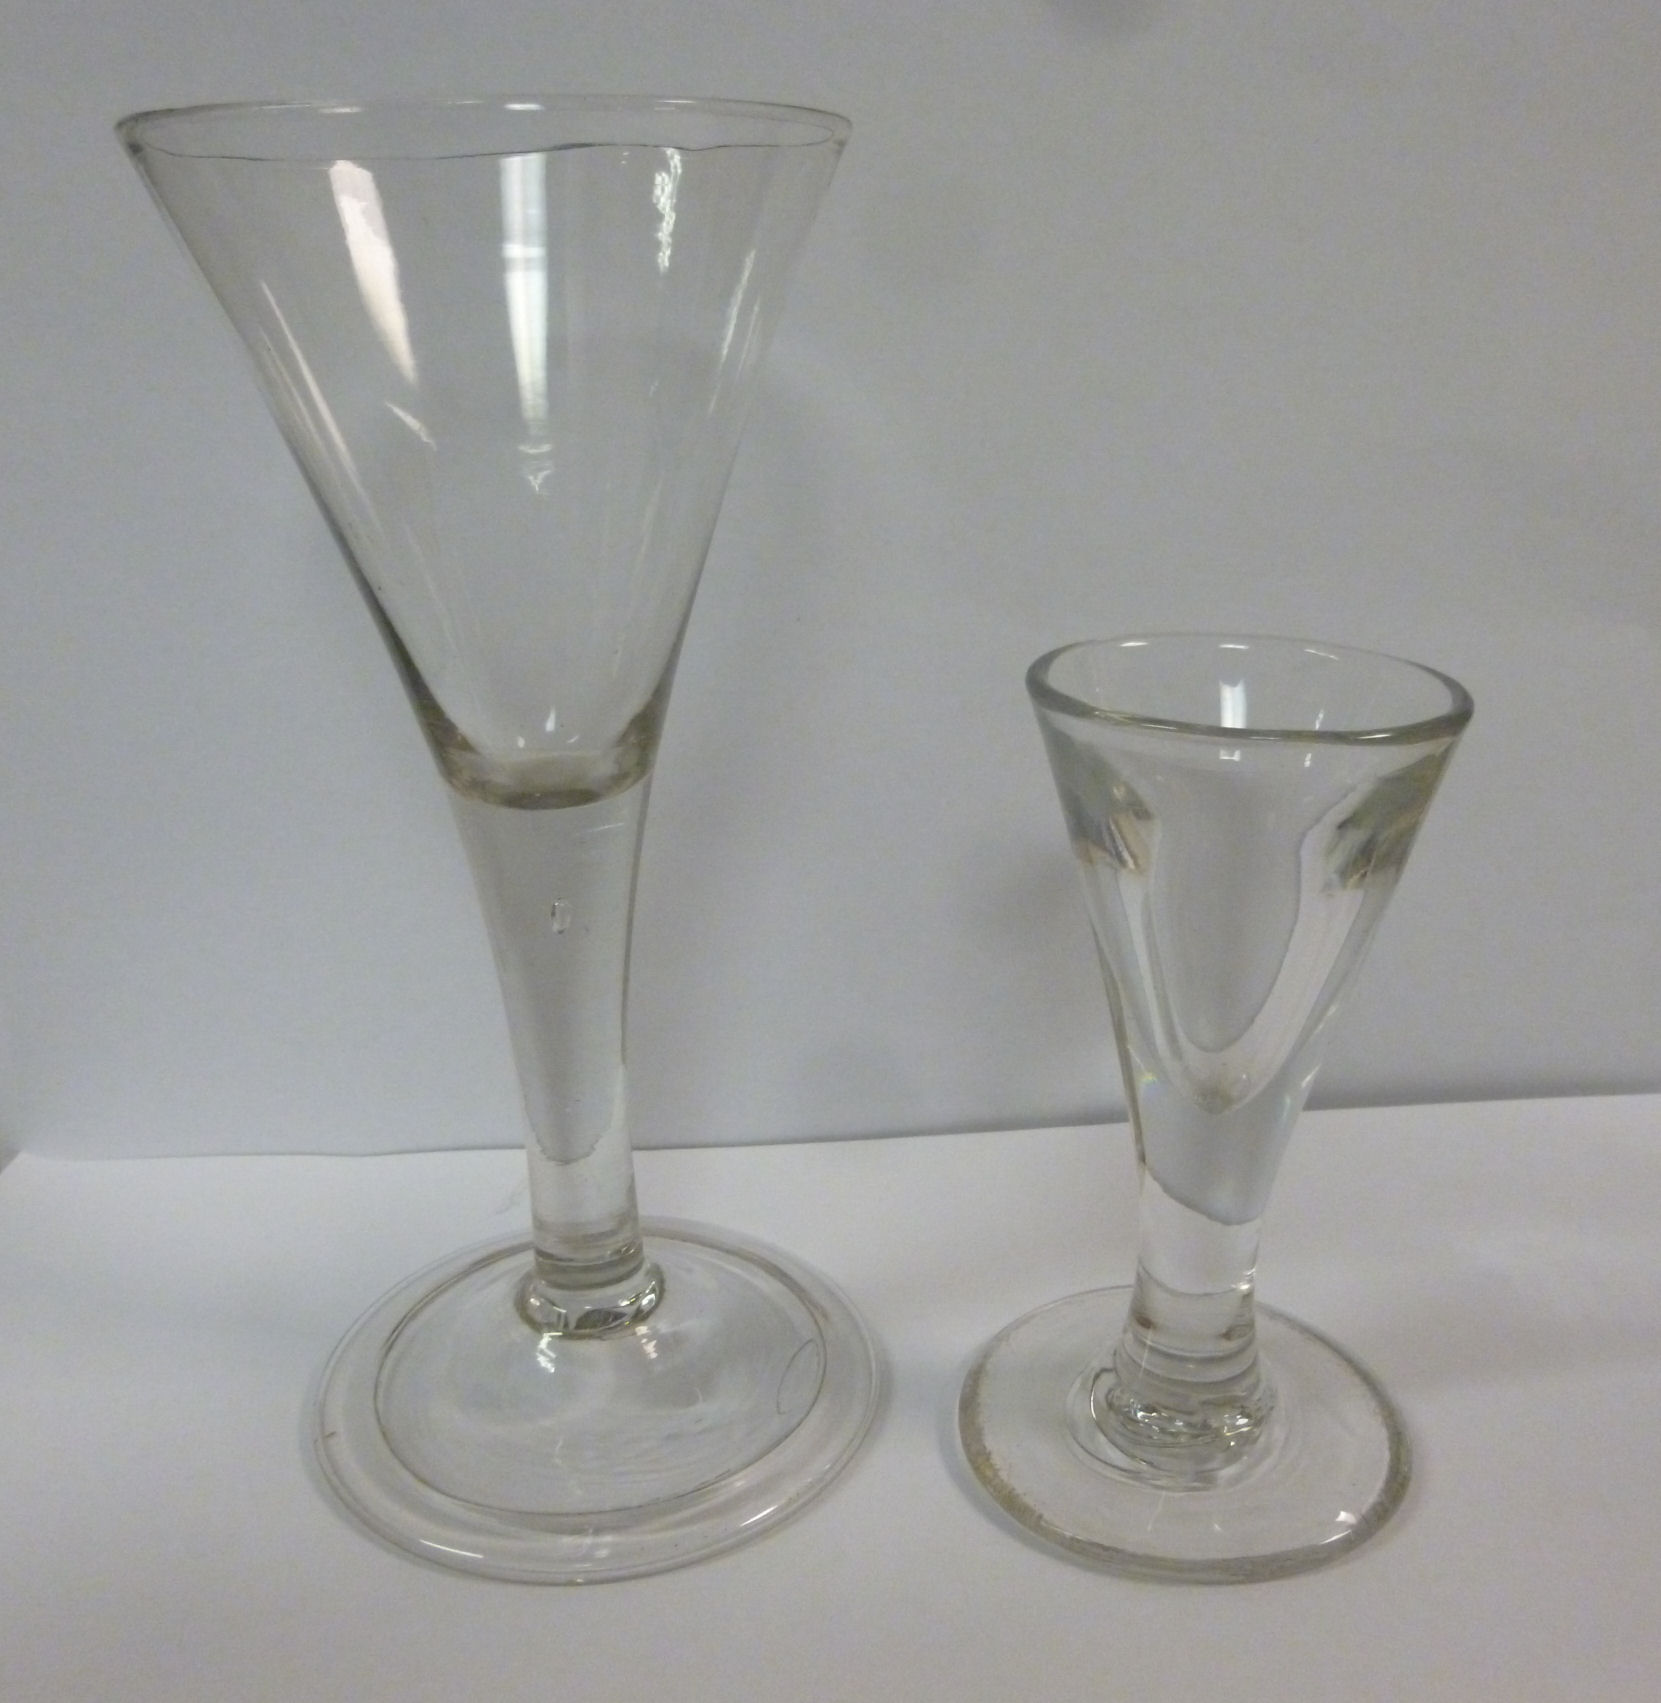 Two late 18thC drinking glasses, viz. a